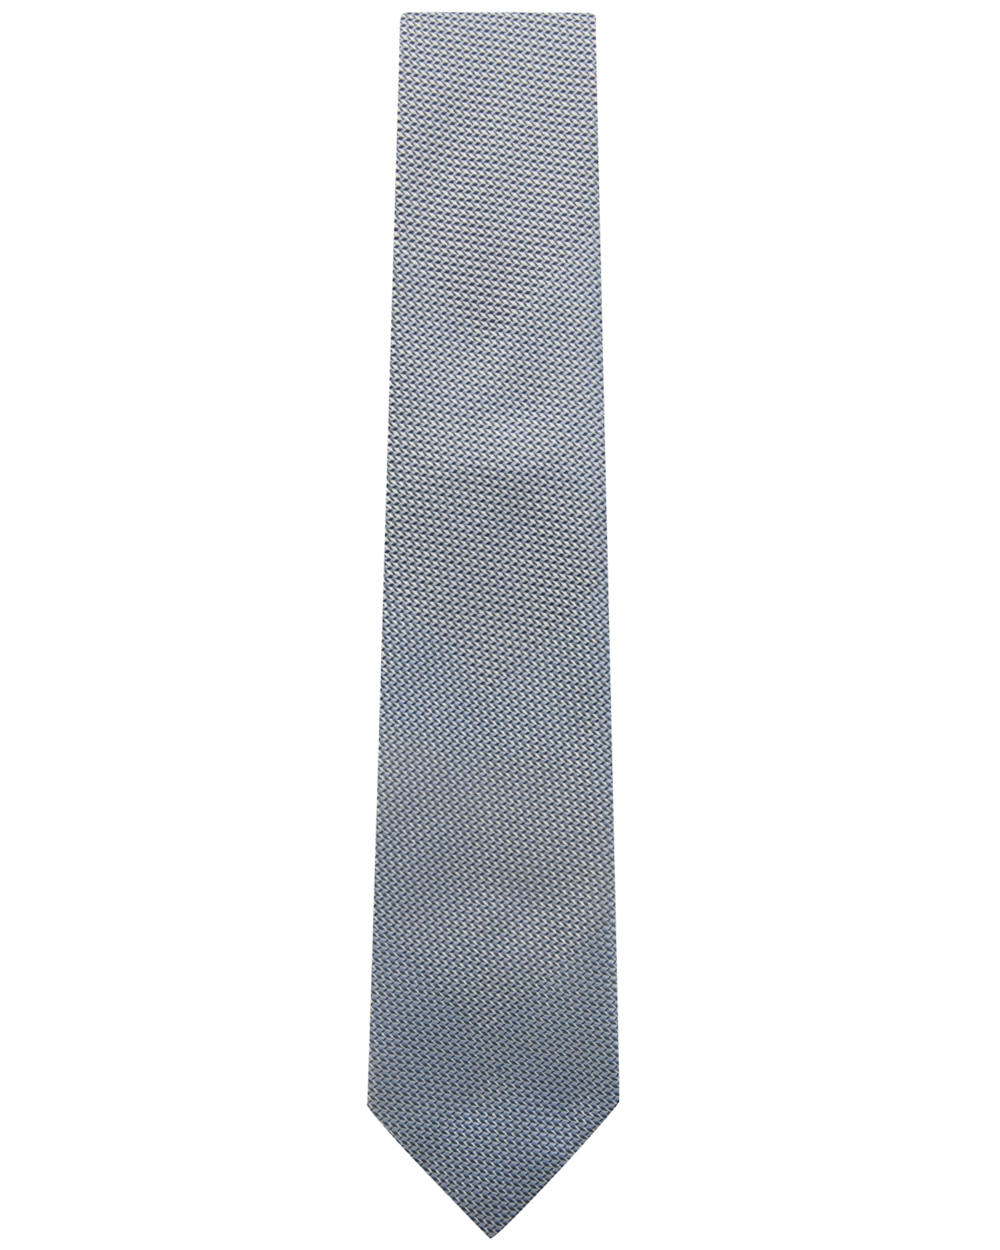 Bluette and Flannel Contrast Tie